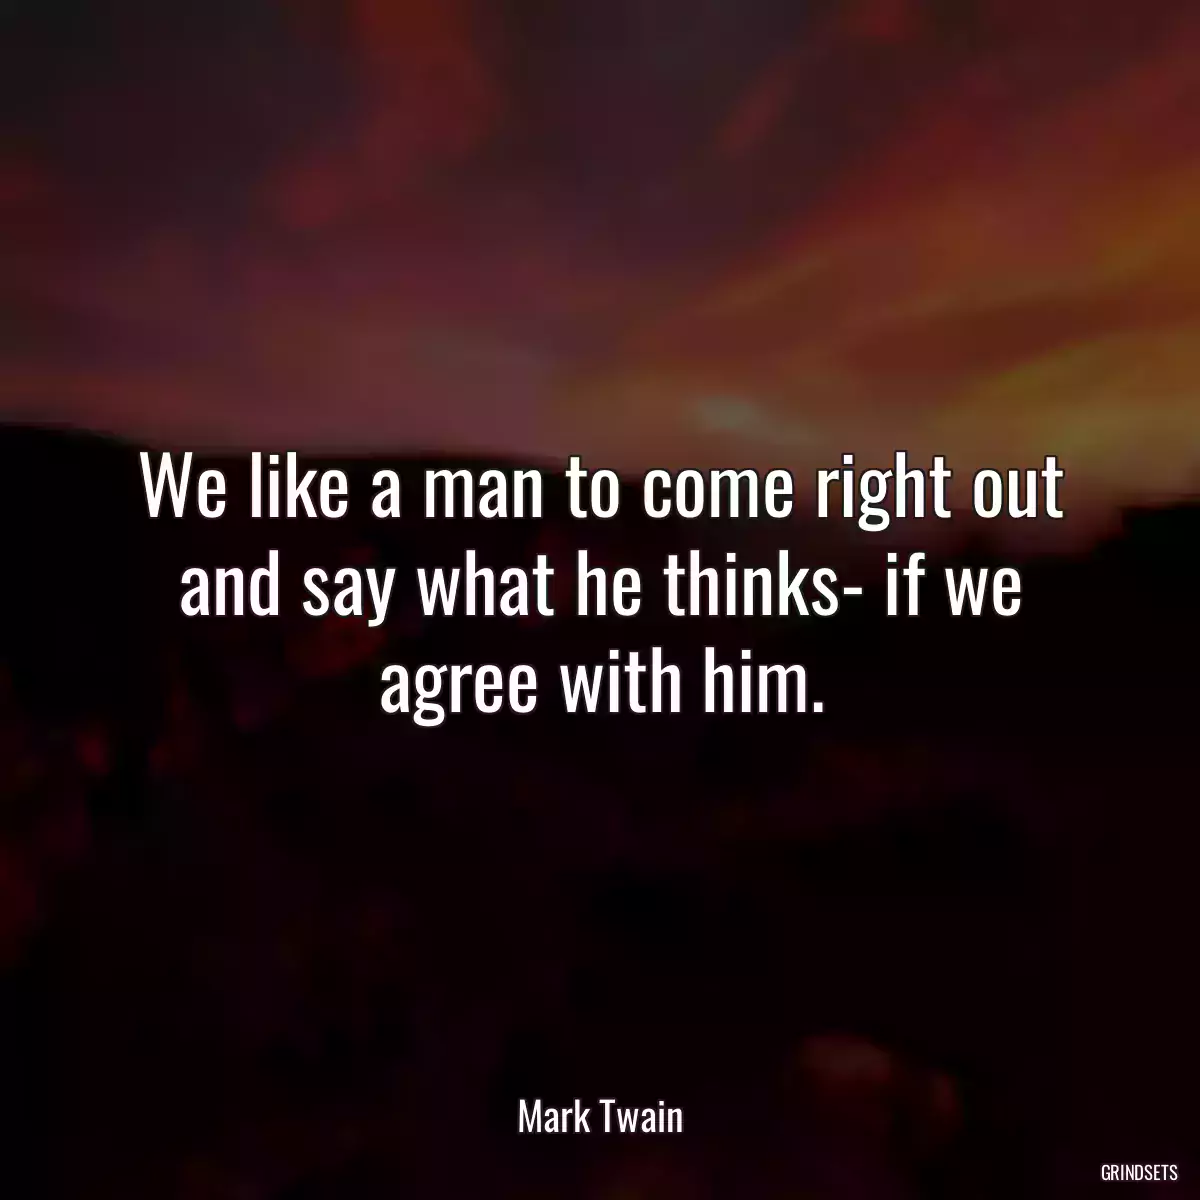 We like a man to come right out and say what he thinks- if we agree with him.